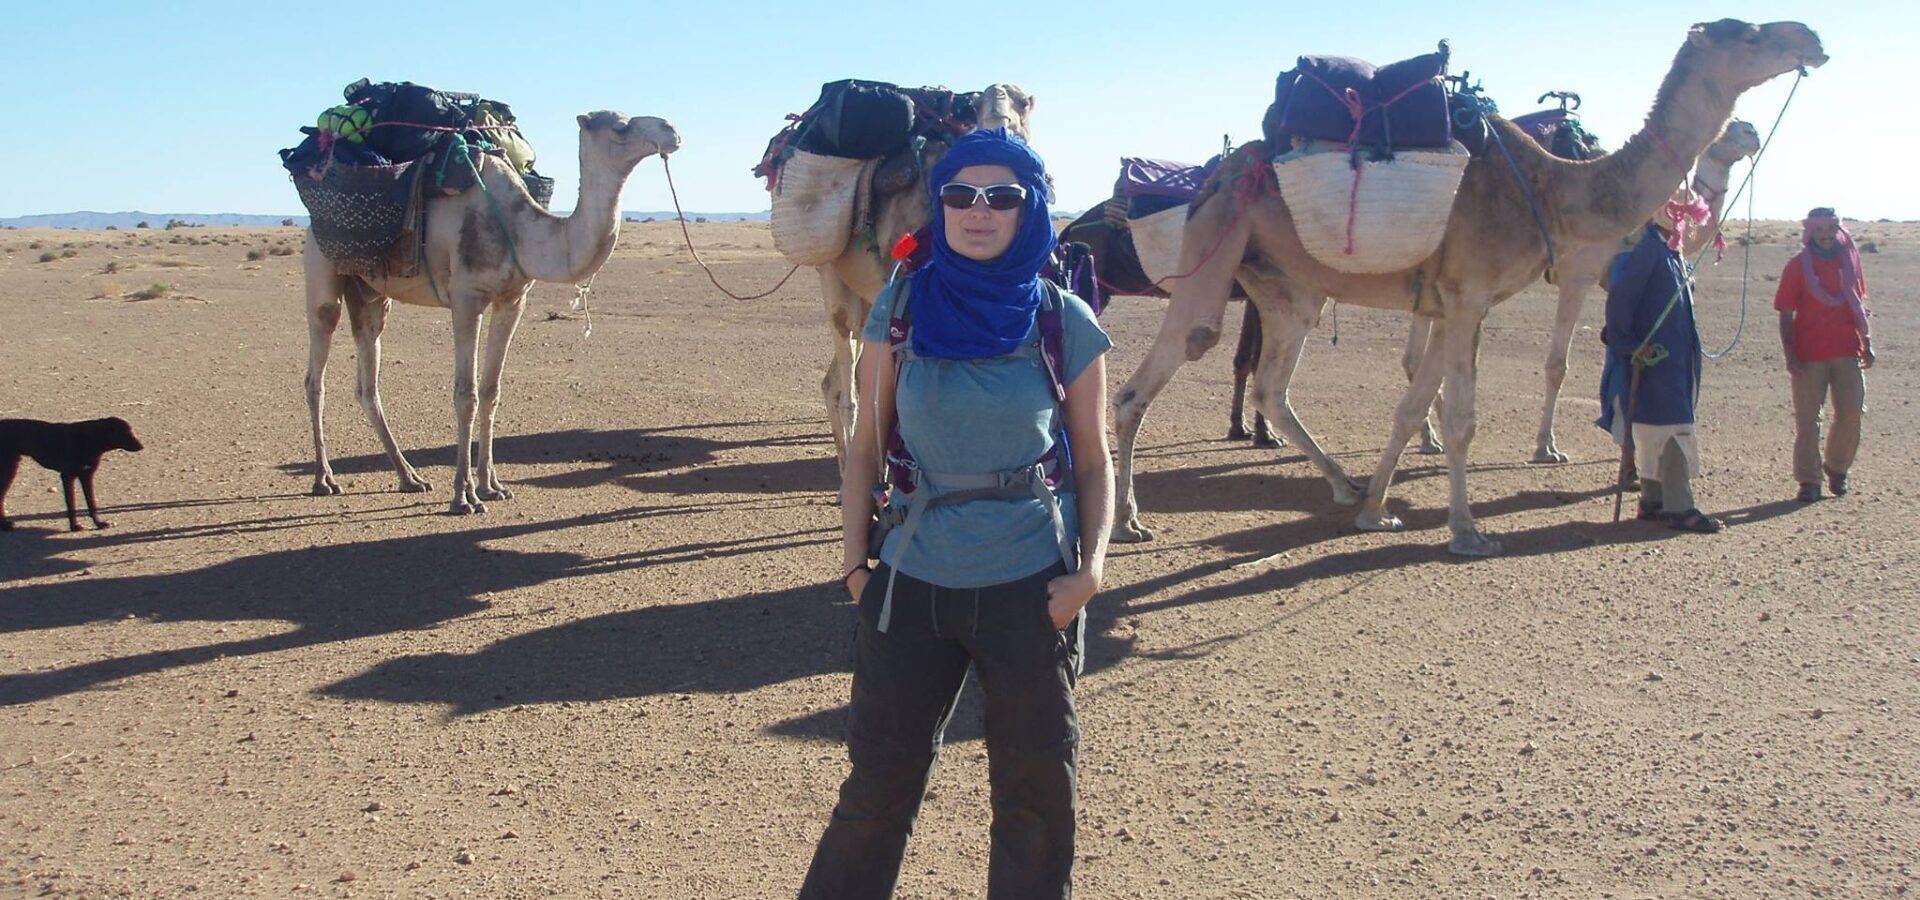 A lady stands in front of three camels in the Sahara Desert as she participates in a trek to raise funds for SPANA.